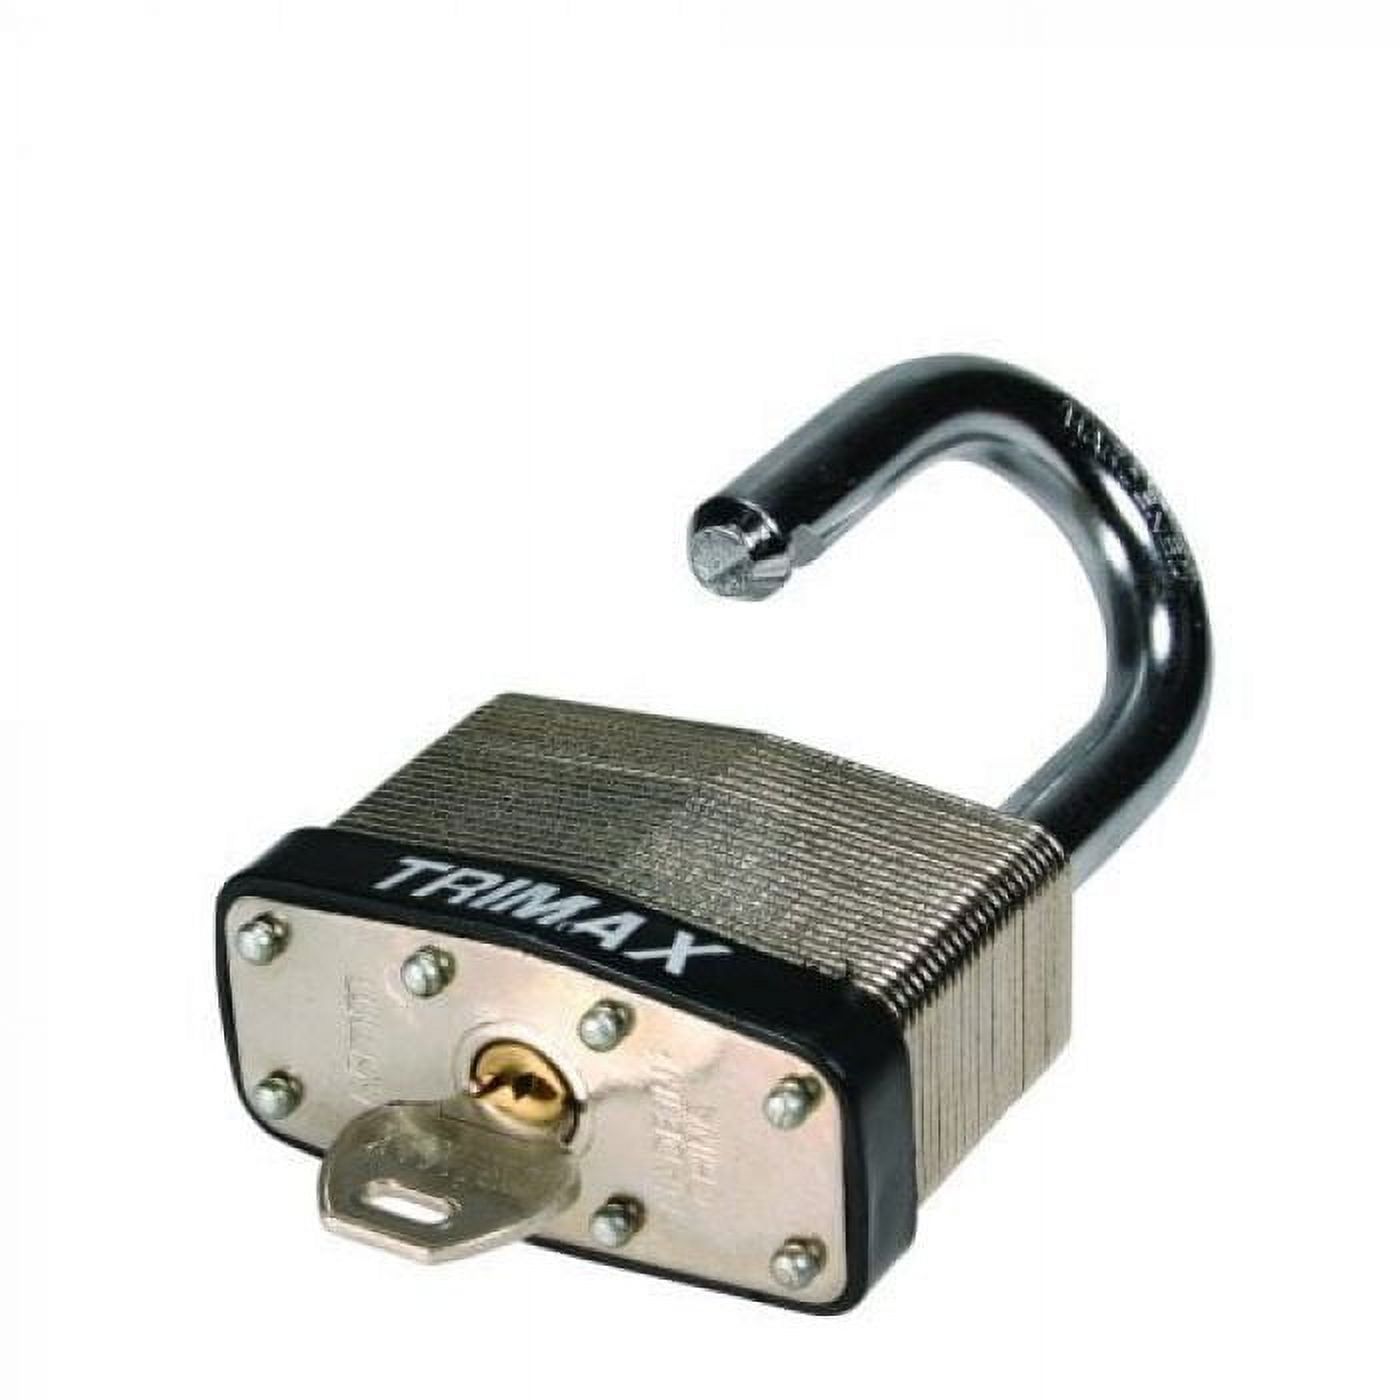 Trimax TLM87 Dual Locking 30mm Solid Steel Laminated Padlock with 7/8 in. X 3/16 in Diameter Shackle - image 1 of 4